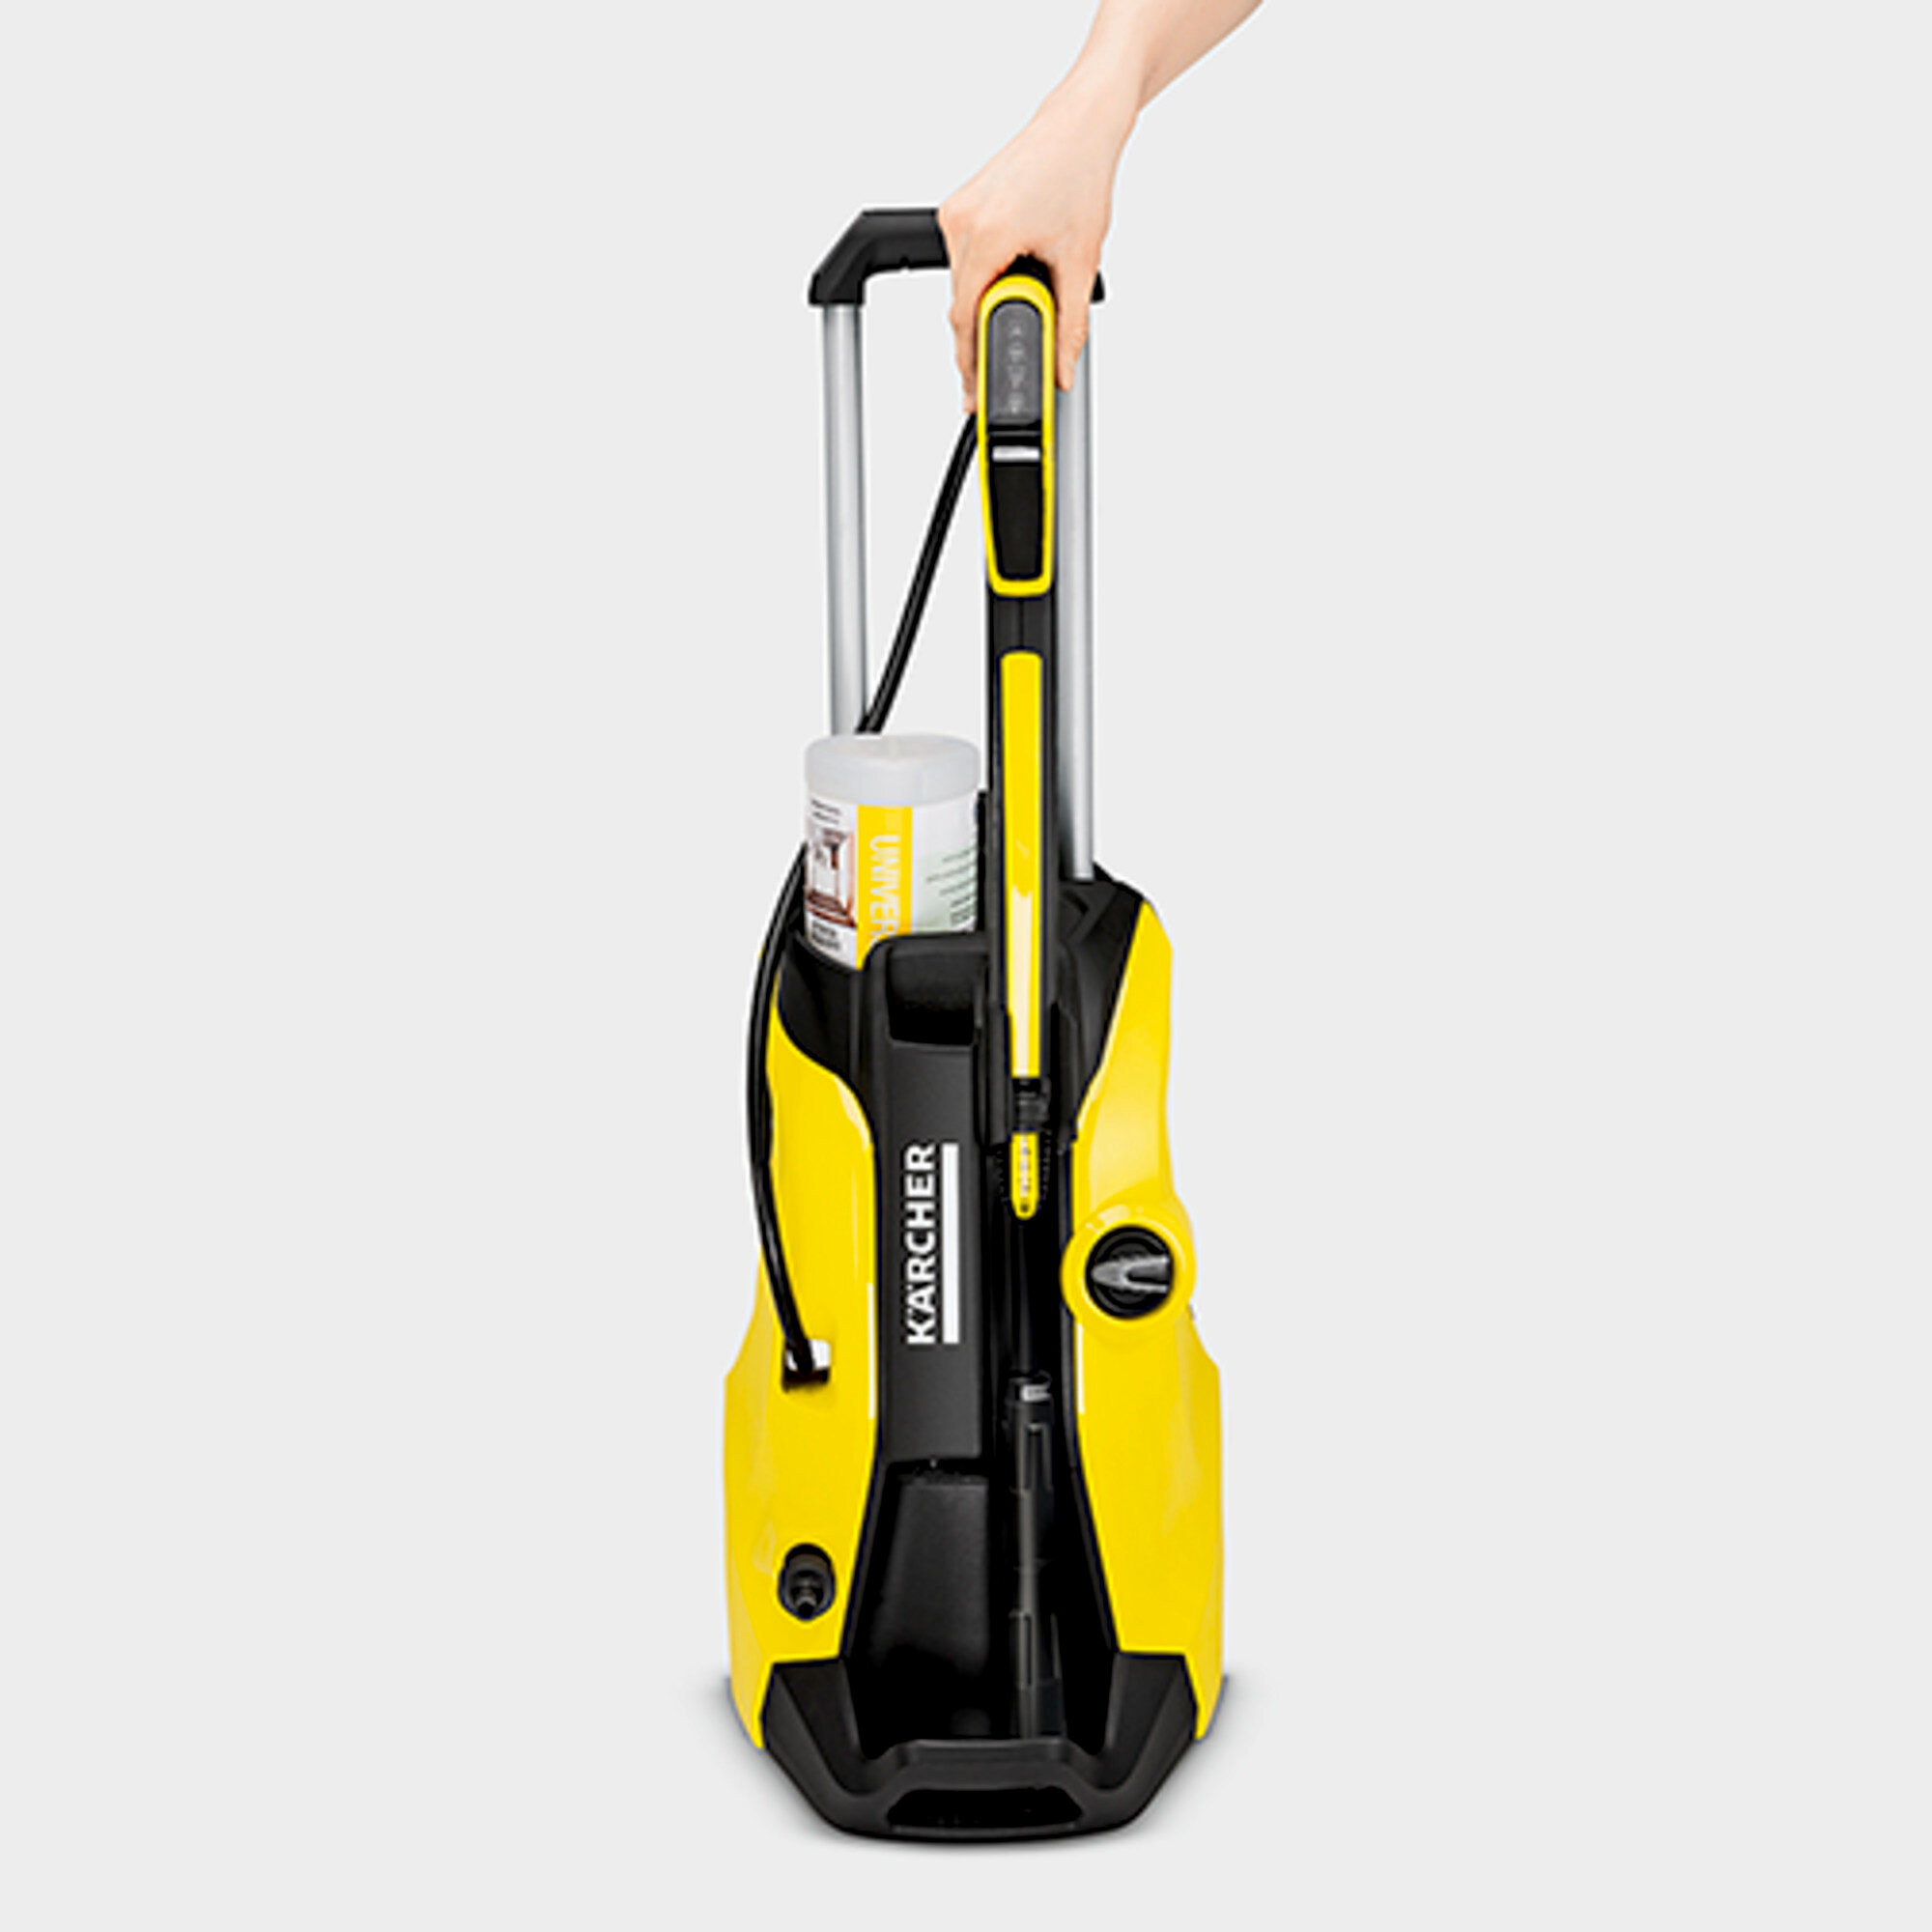 Pressure washer K 5 Full Control: Parking position for easy accessory storage at all times